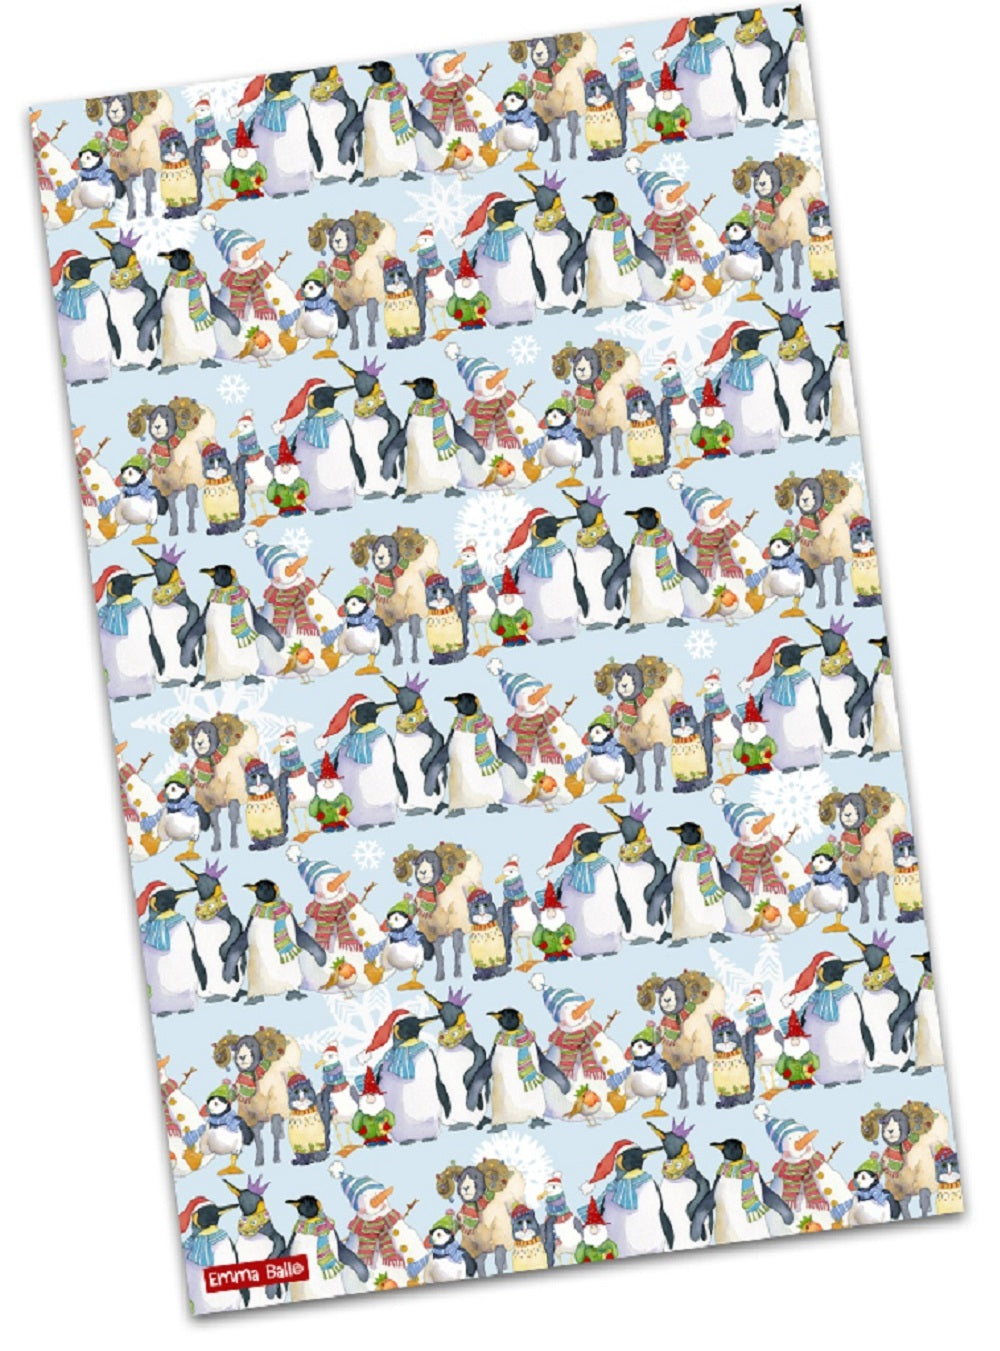 Emma Ball "Christmas Friends", Pure cotton tea towel. Printed in the UK.